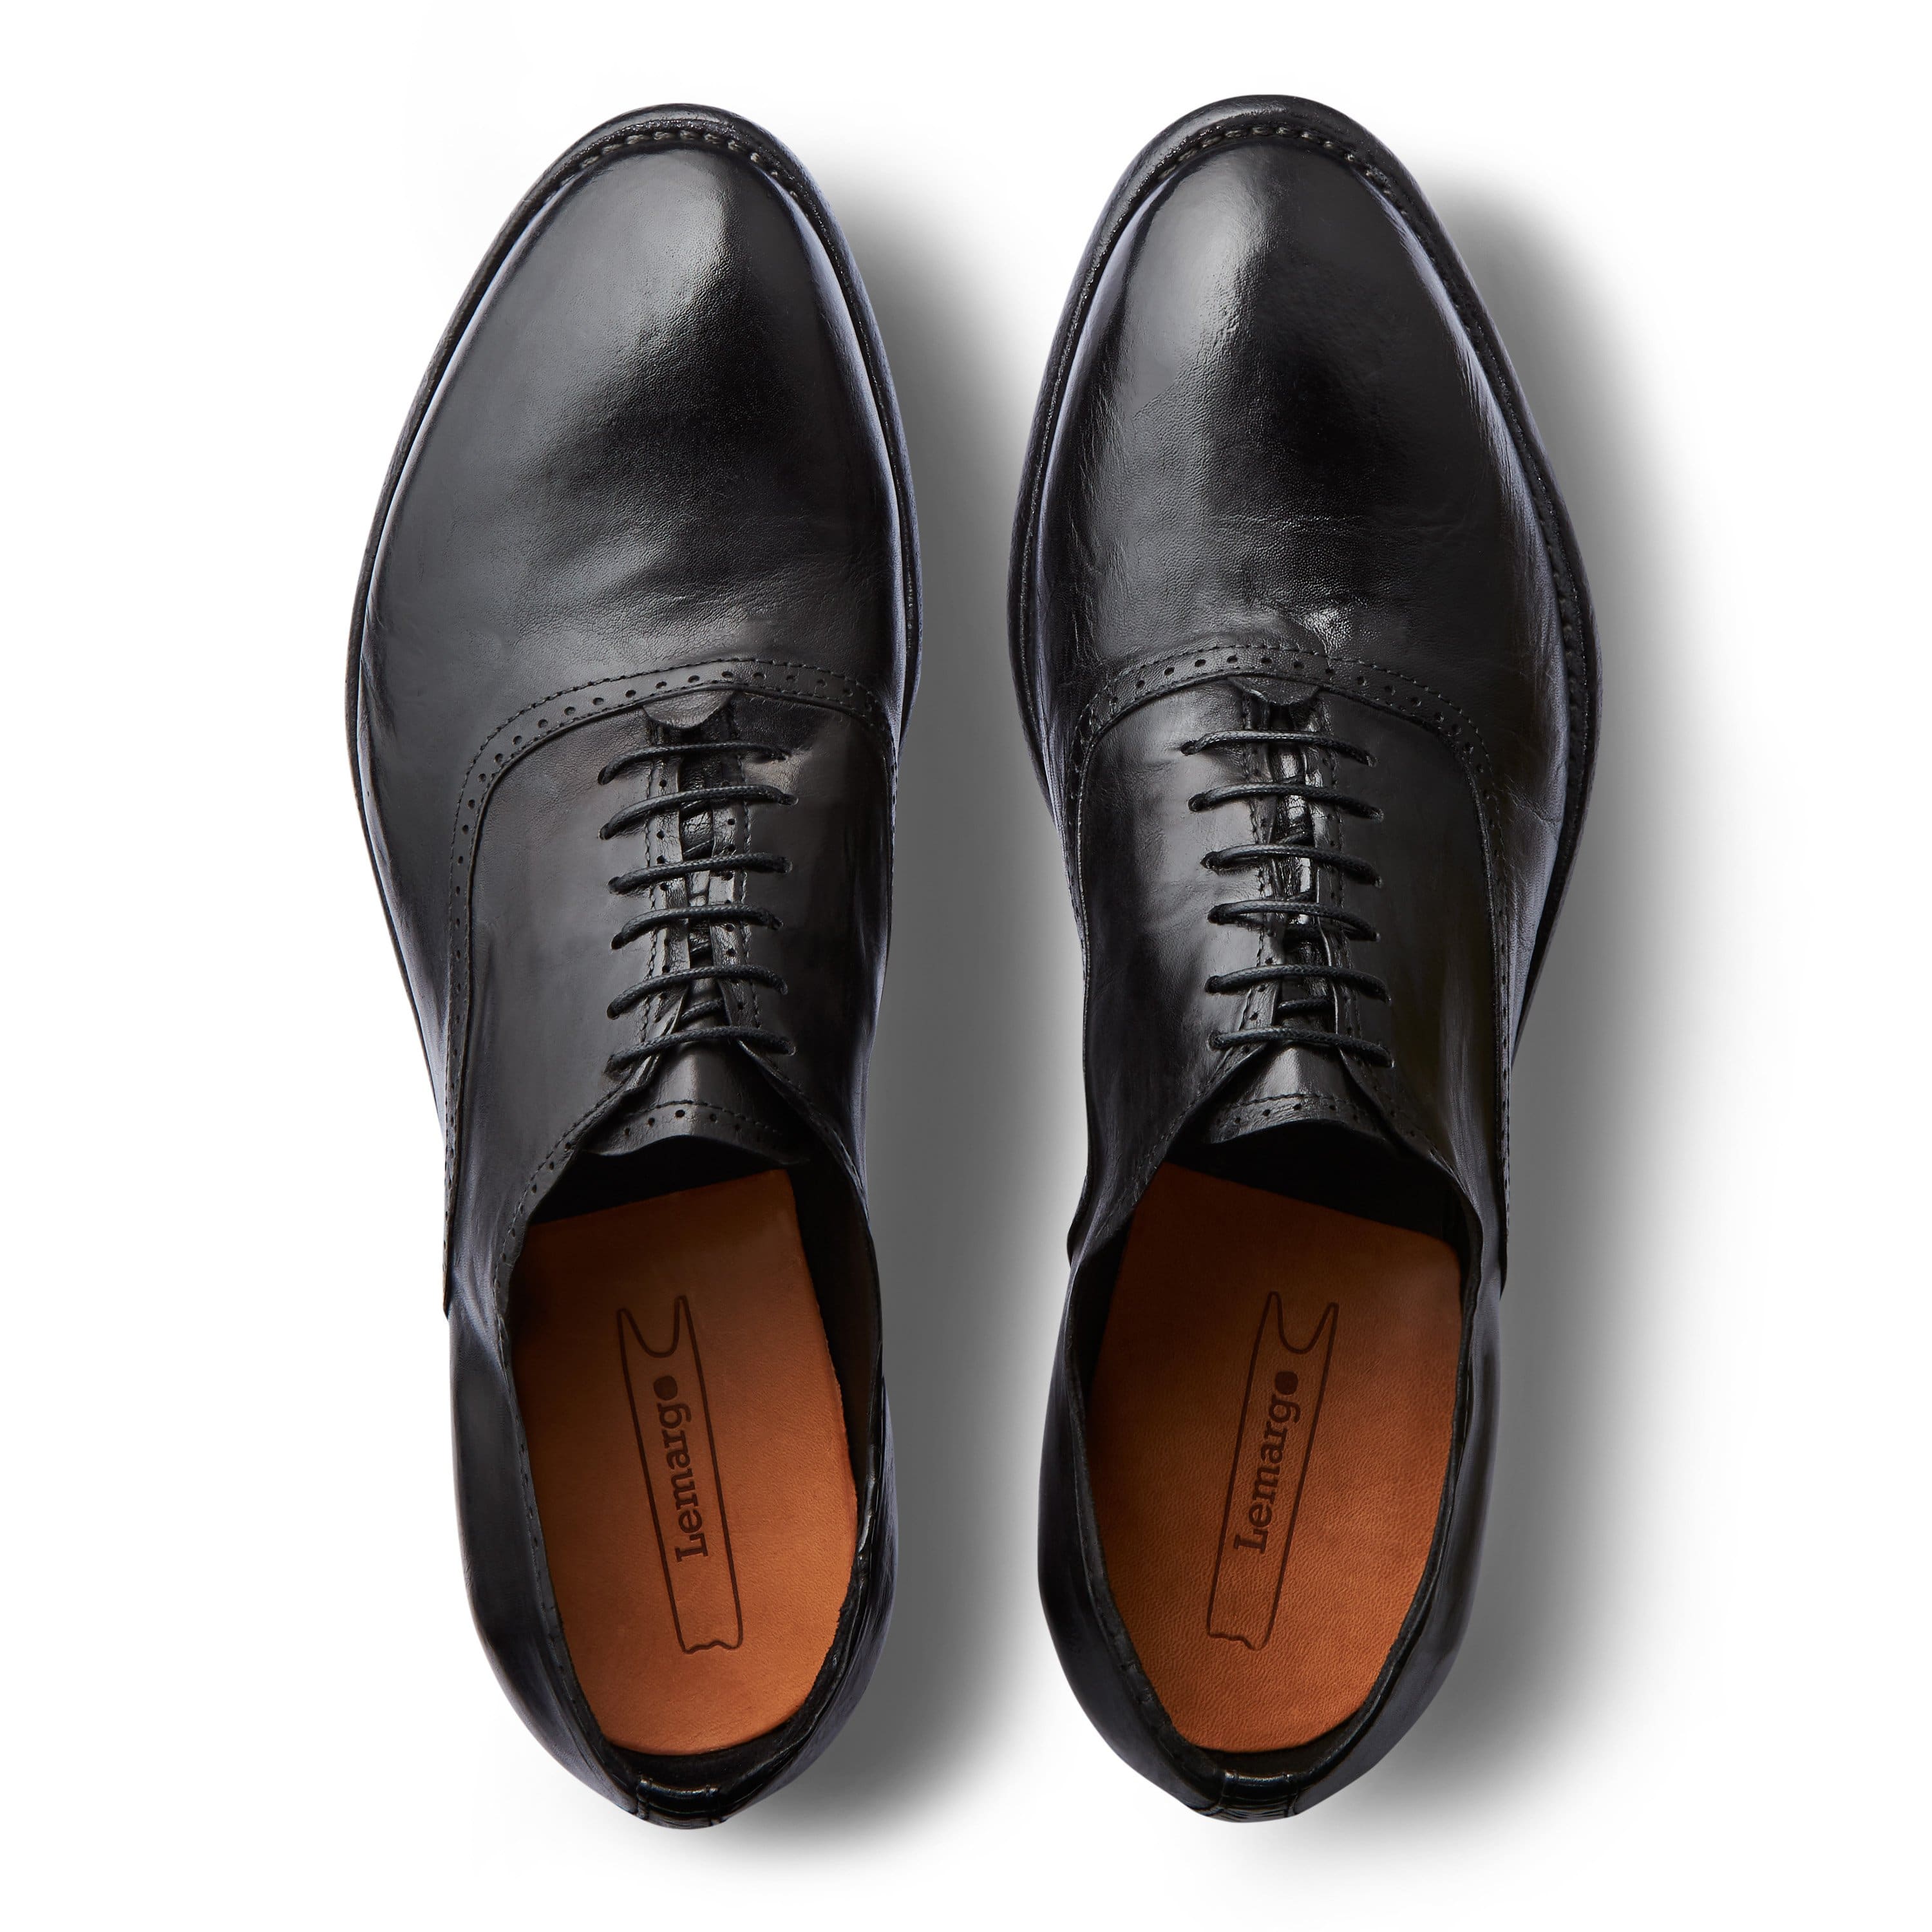 Lemargo AC01A Oxford - 124 Shoes